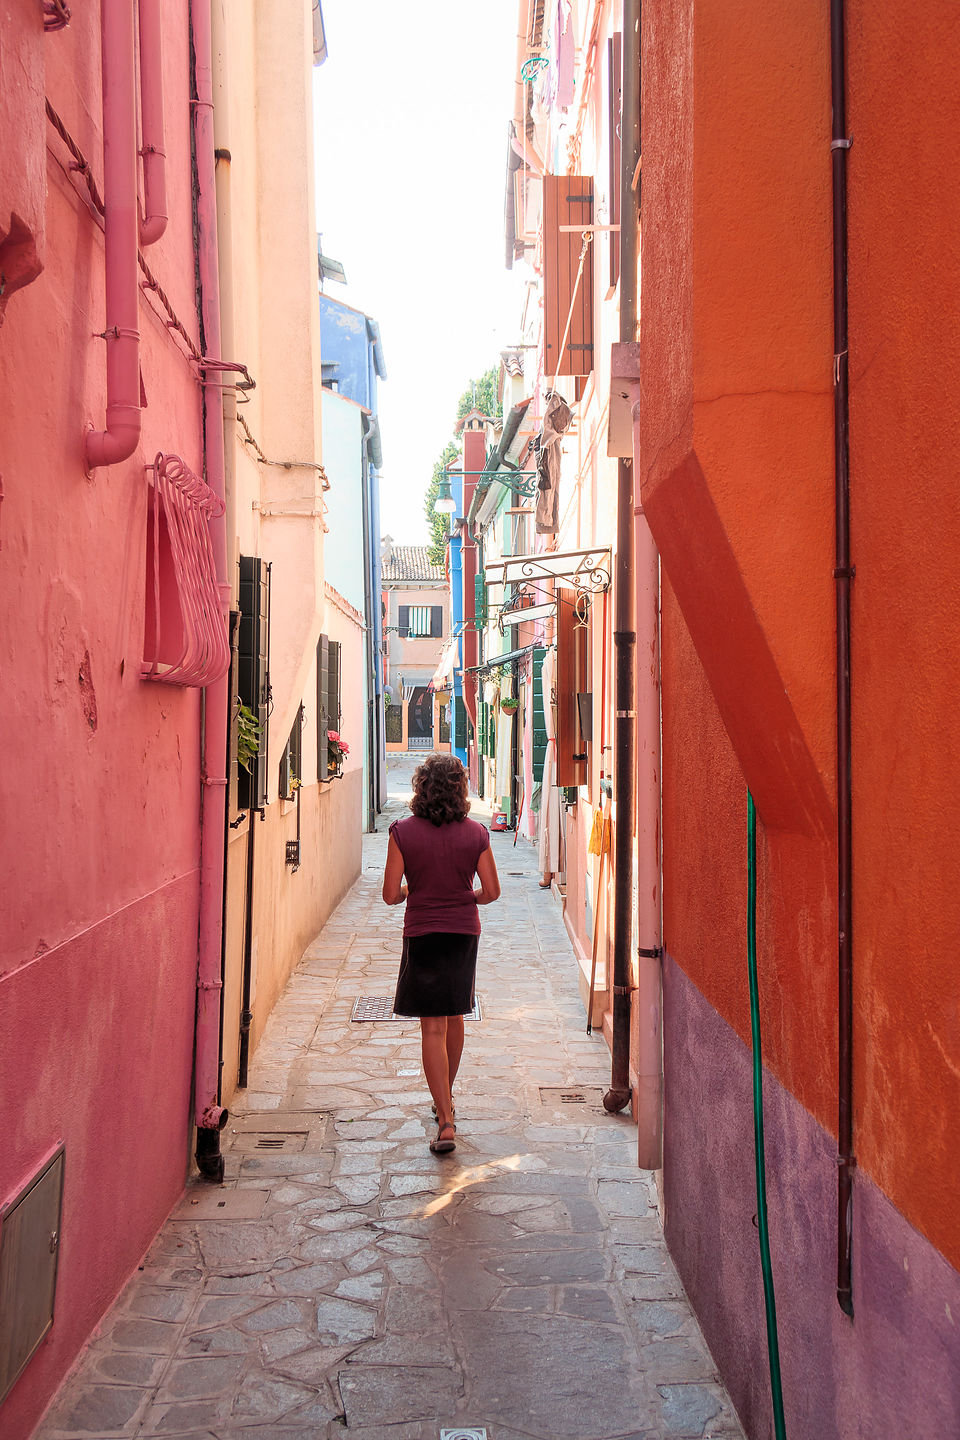 Strolling the alleys of Burano